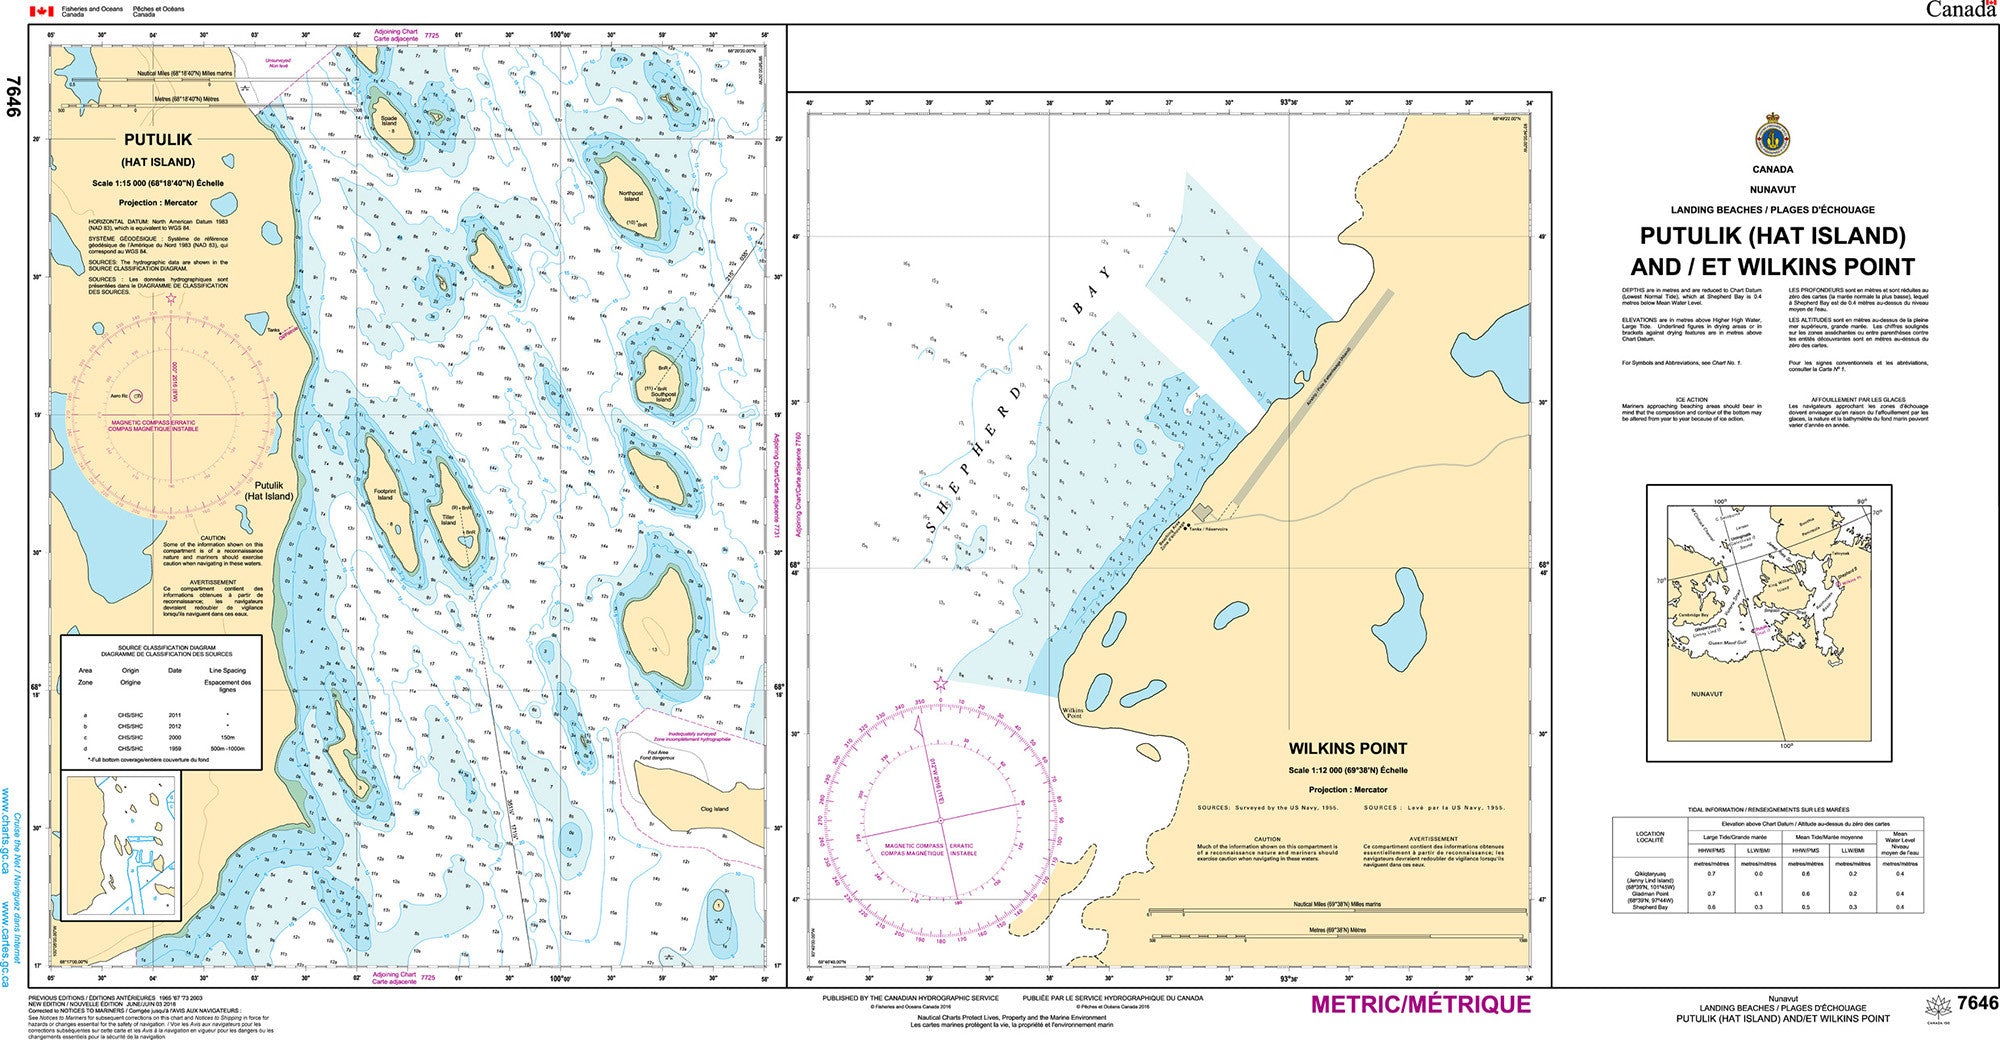 Canadian Hydrographic Service Nautical Chart CHS7646: McClintock Bay and/et Wilkins Point